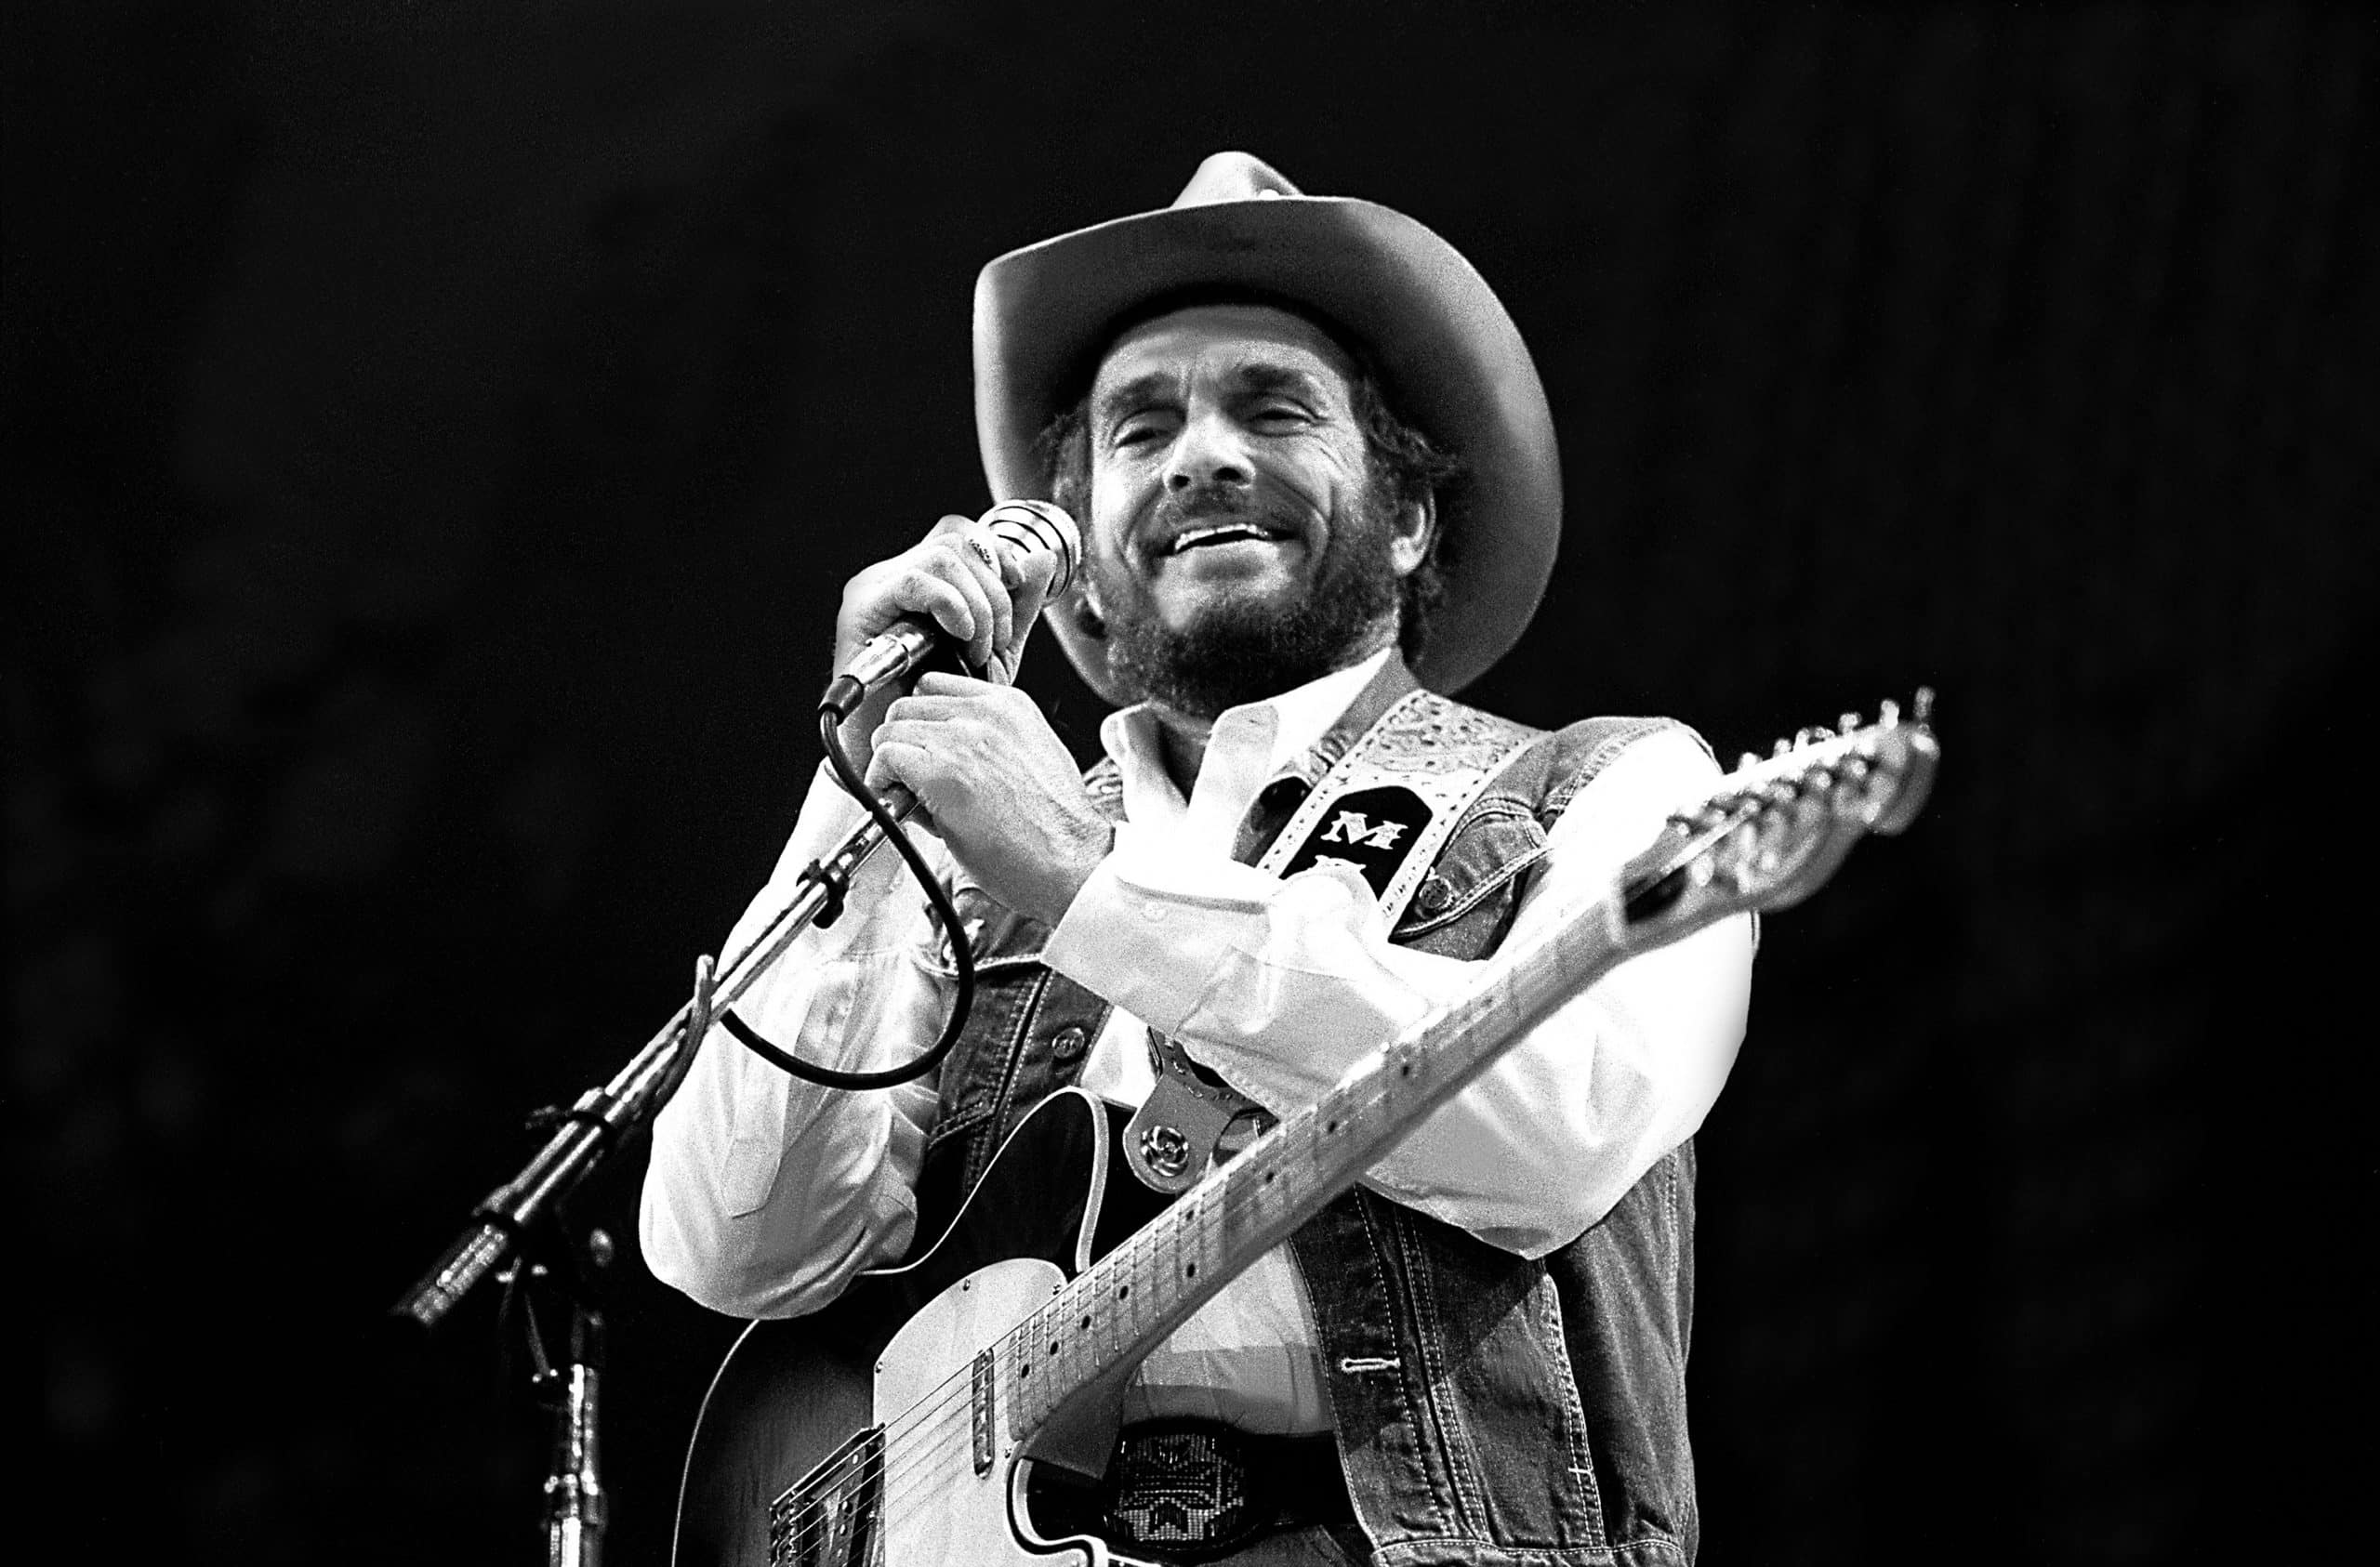 Merle Haggard demonstrated his songwriting genius in the track "Big City"